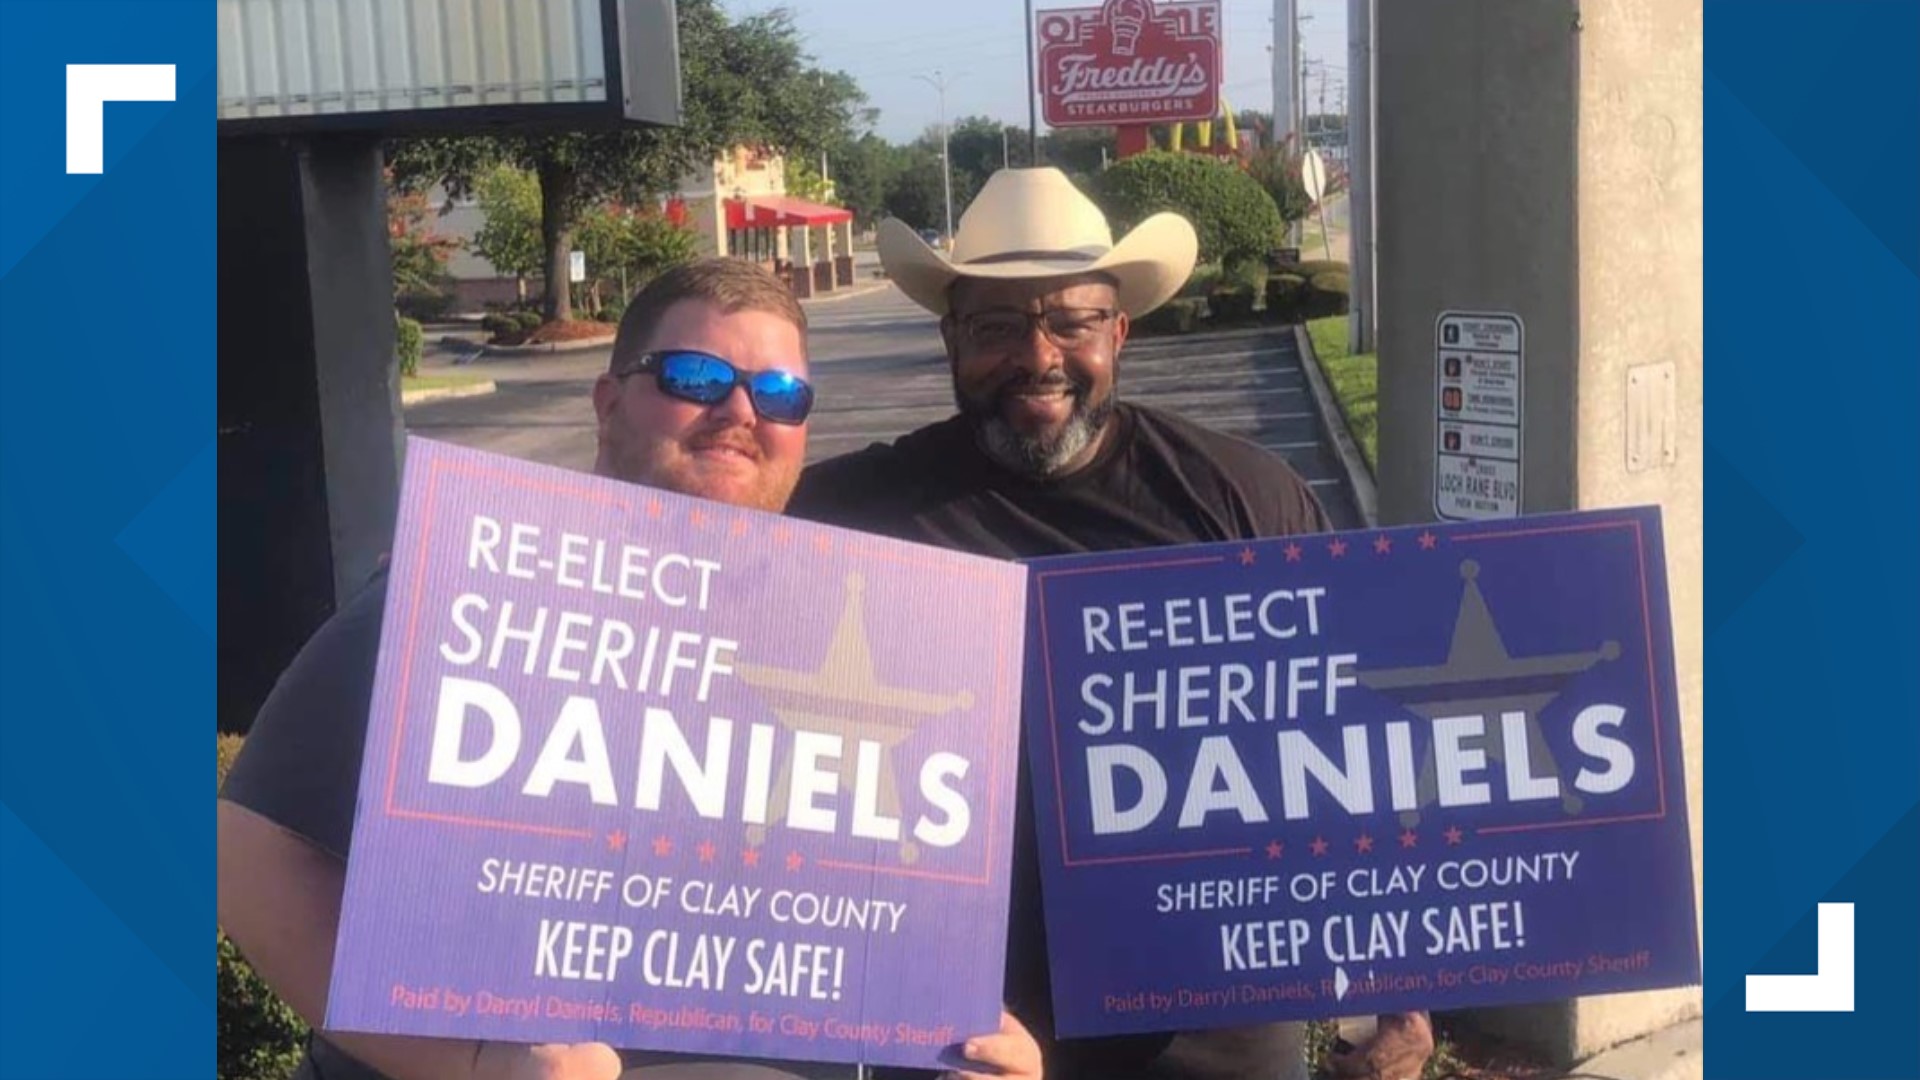 Governor Ron DeSantis’ office says Clay County Sheriff Darryl Daniels suspension will remain in effect regardless of the election outcome.